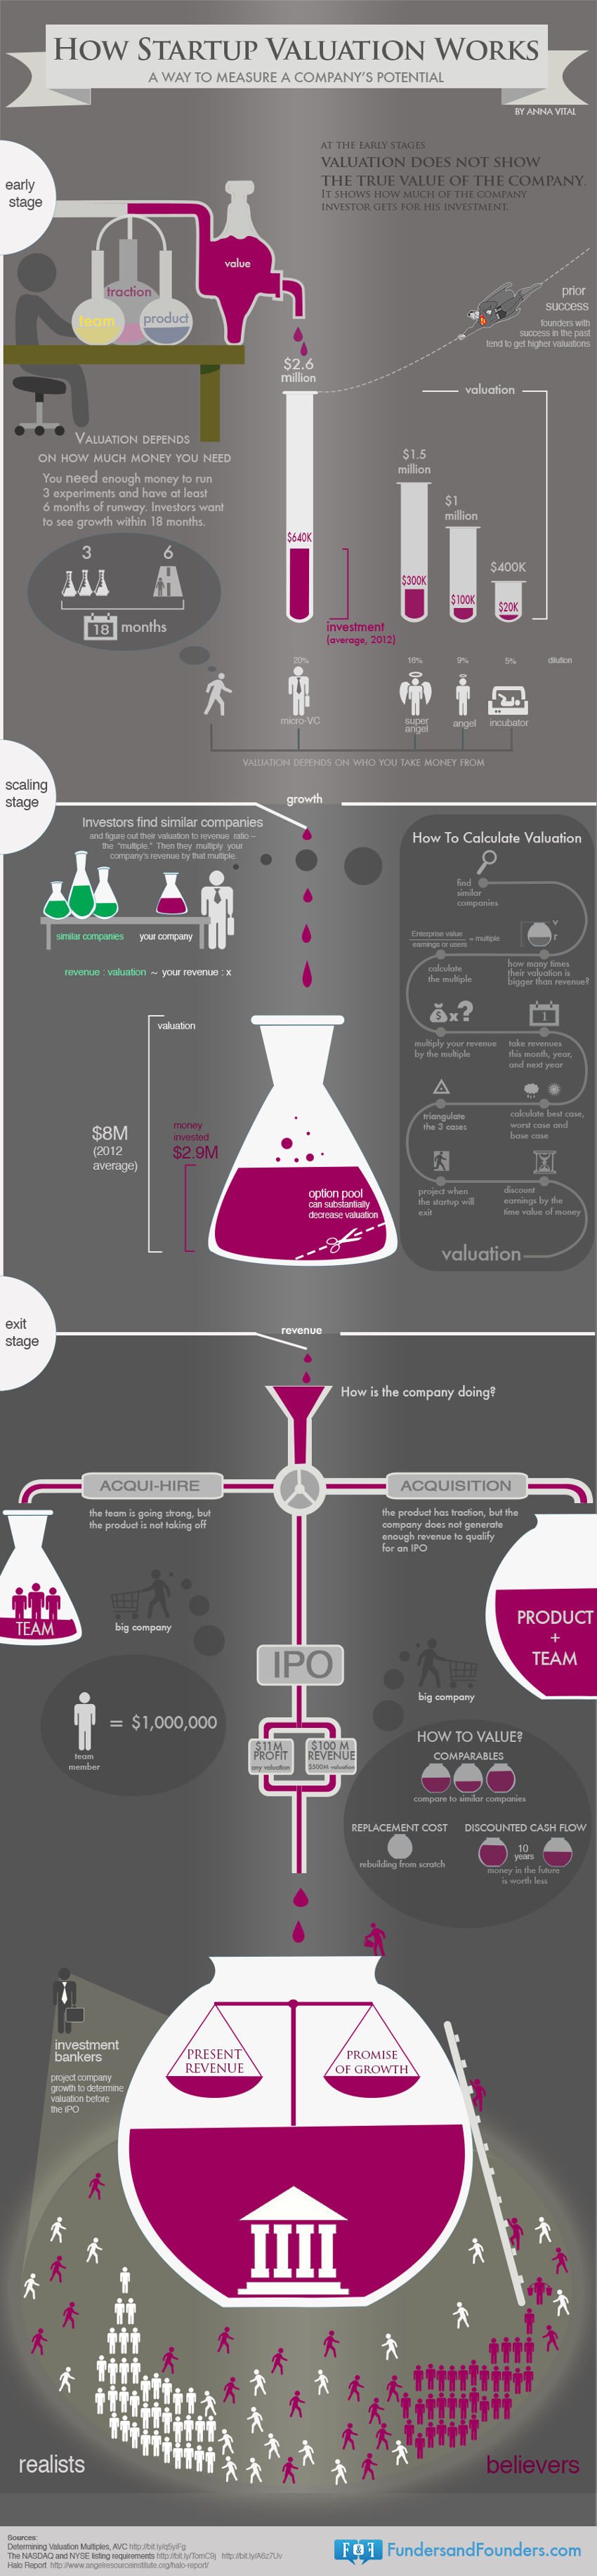 How startup valuation works infographic